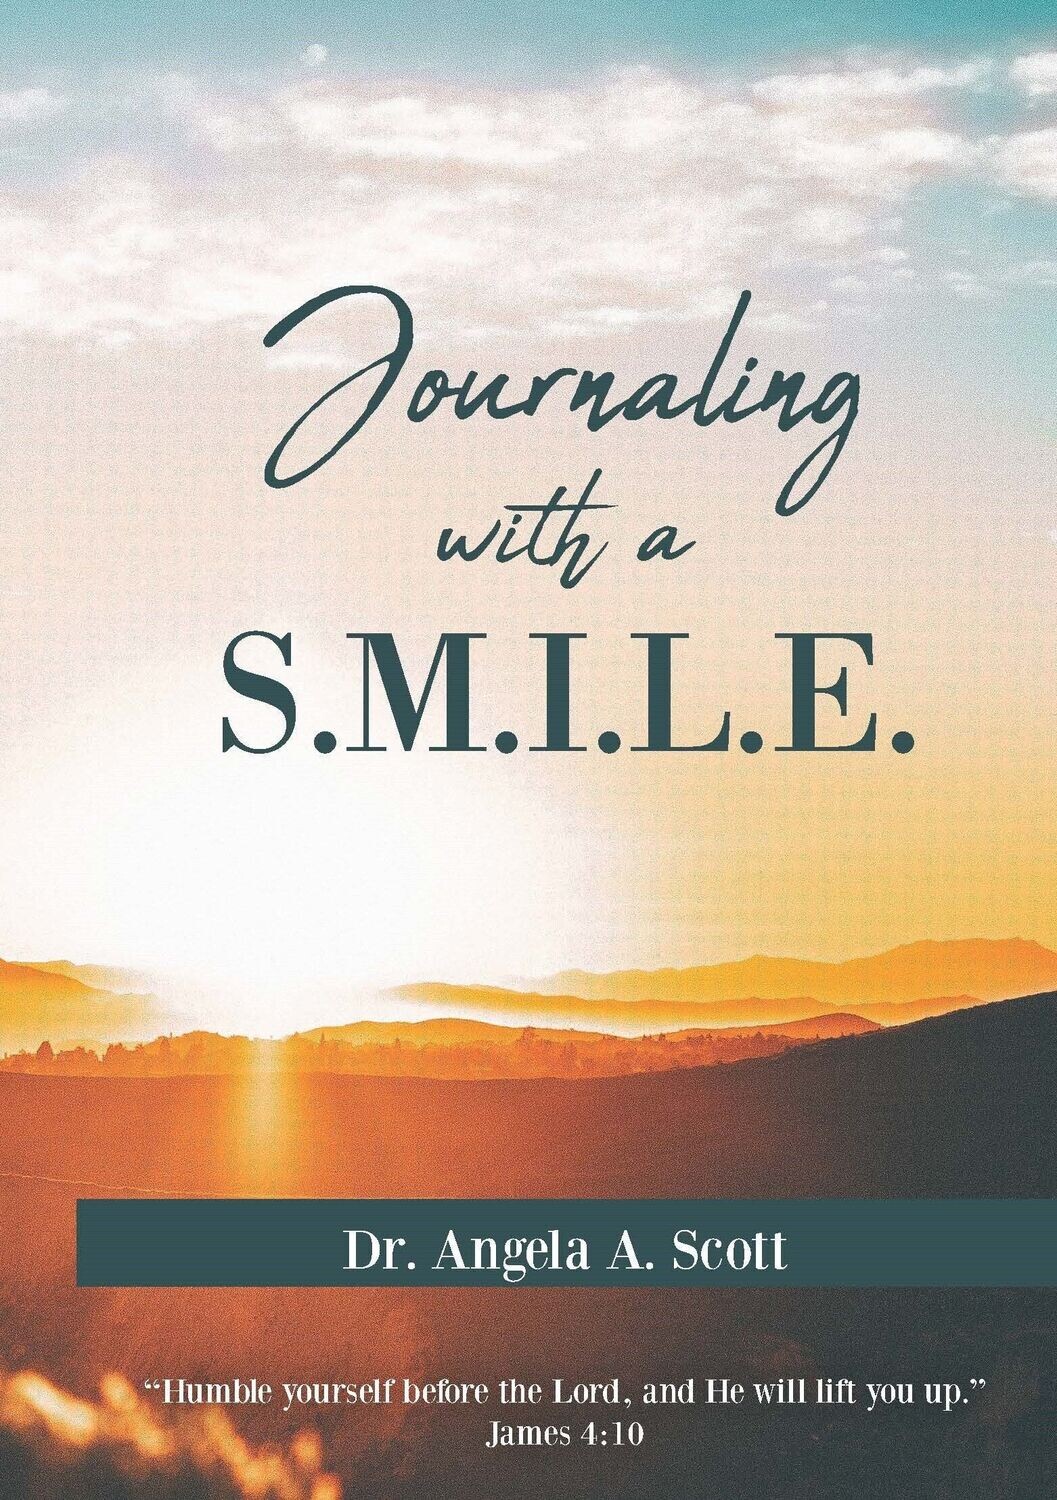 Journaling With A S.M.I.L.E.